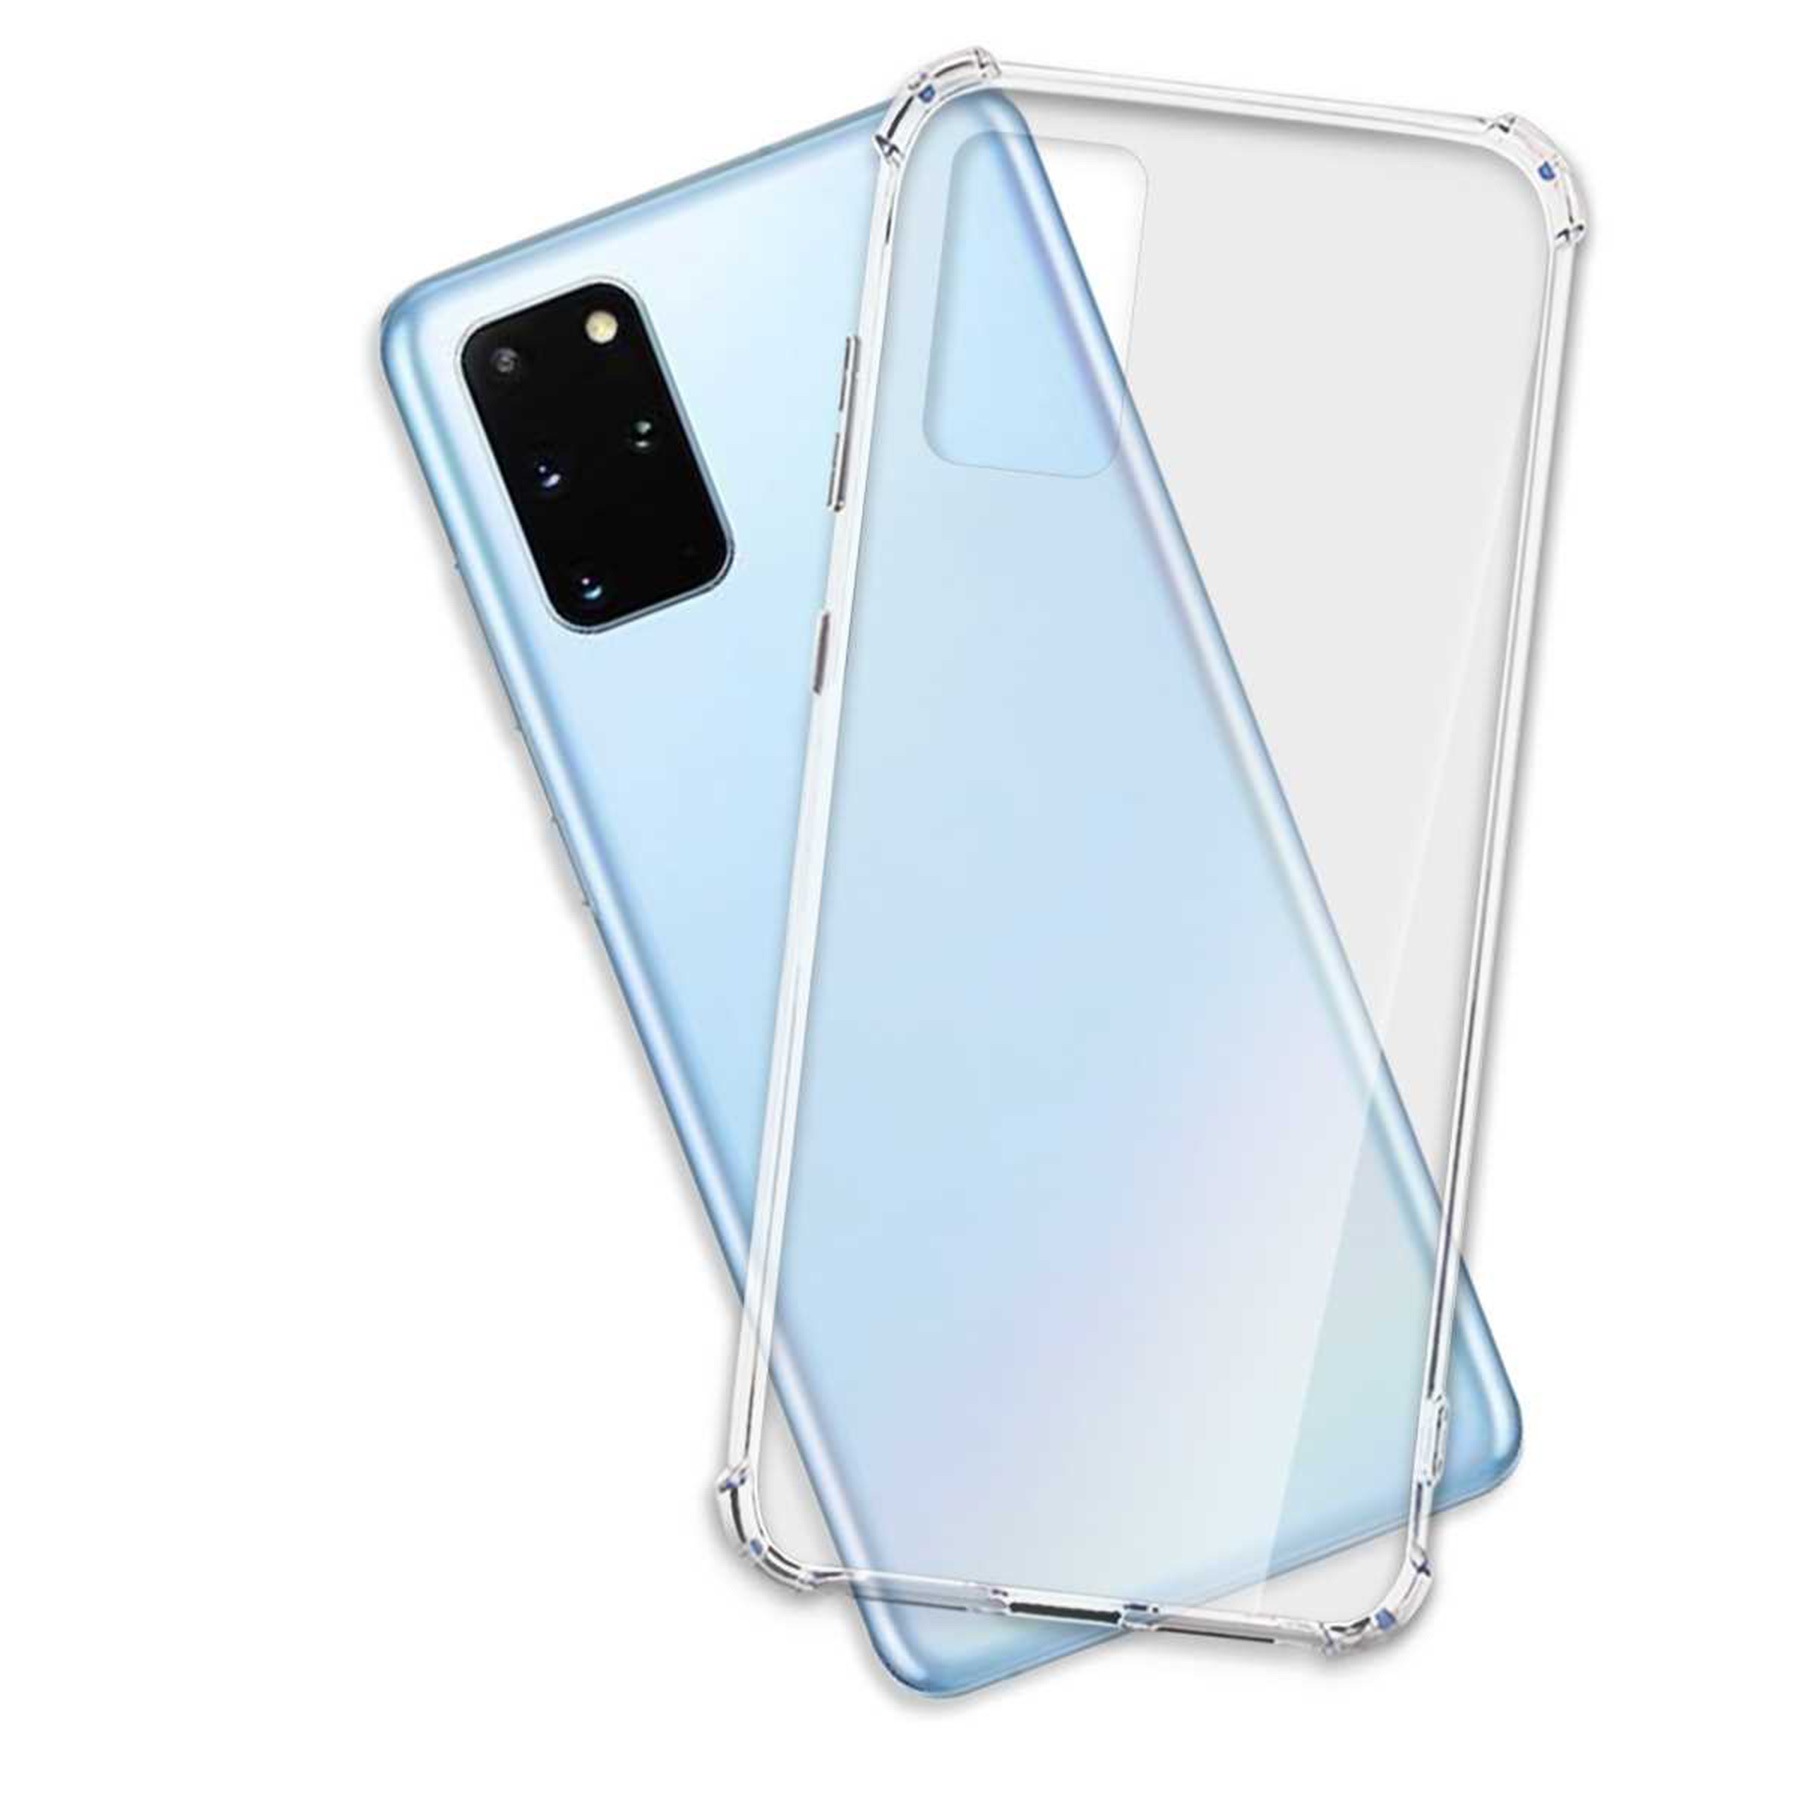 Case, Transparent Plus, ENERGY Galaxy Samsung, Clear S20 MORE Armor Backcover, MTB